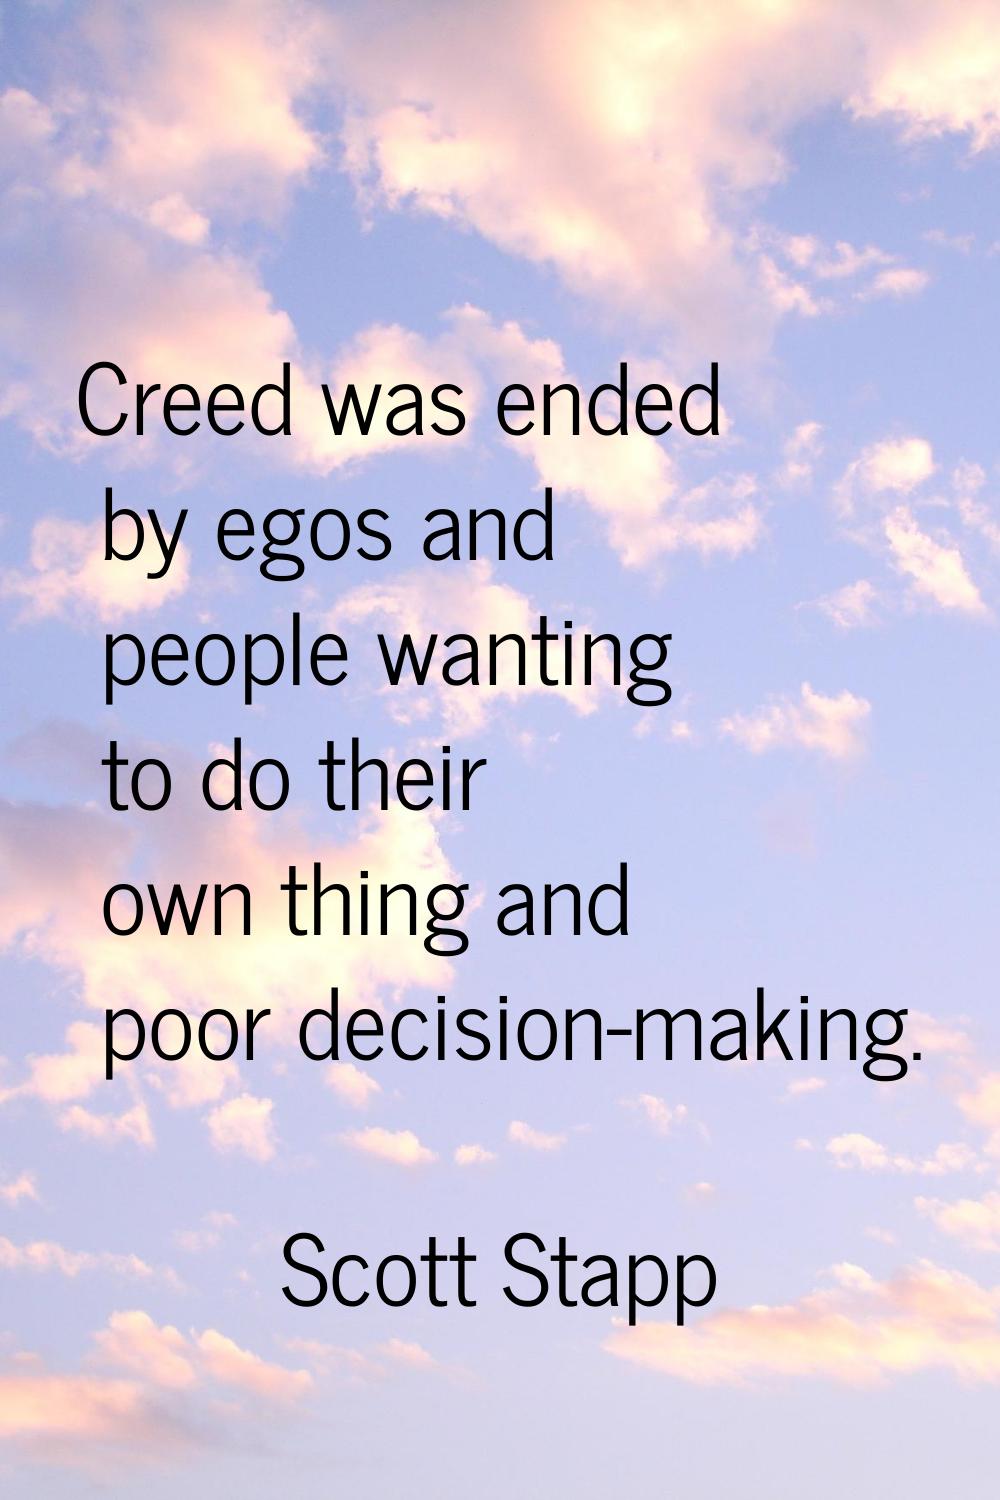 Creed was ended by egos and people wanting to do their own thing and poor decision-making.